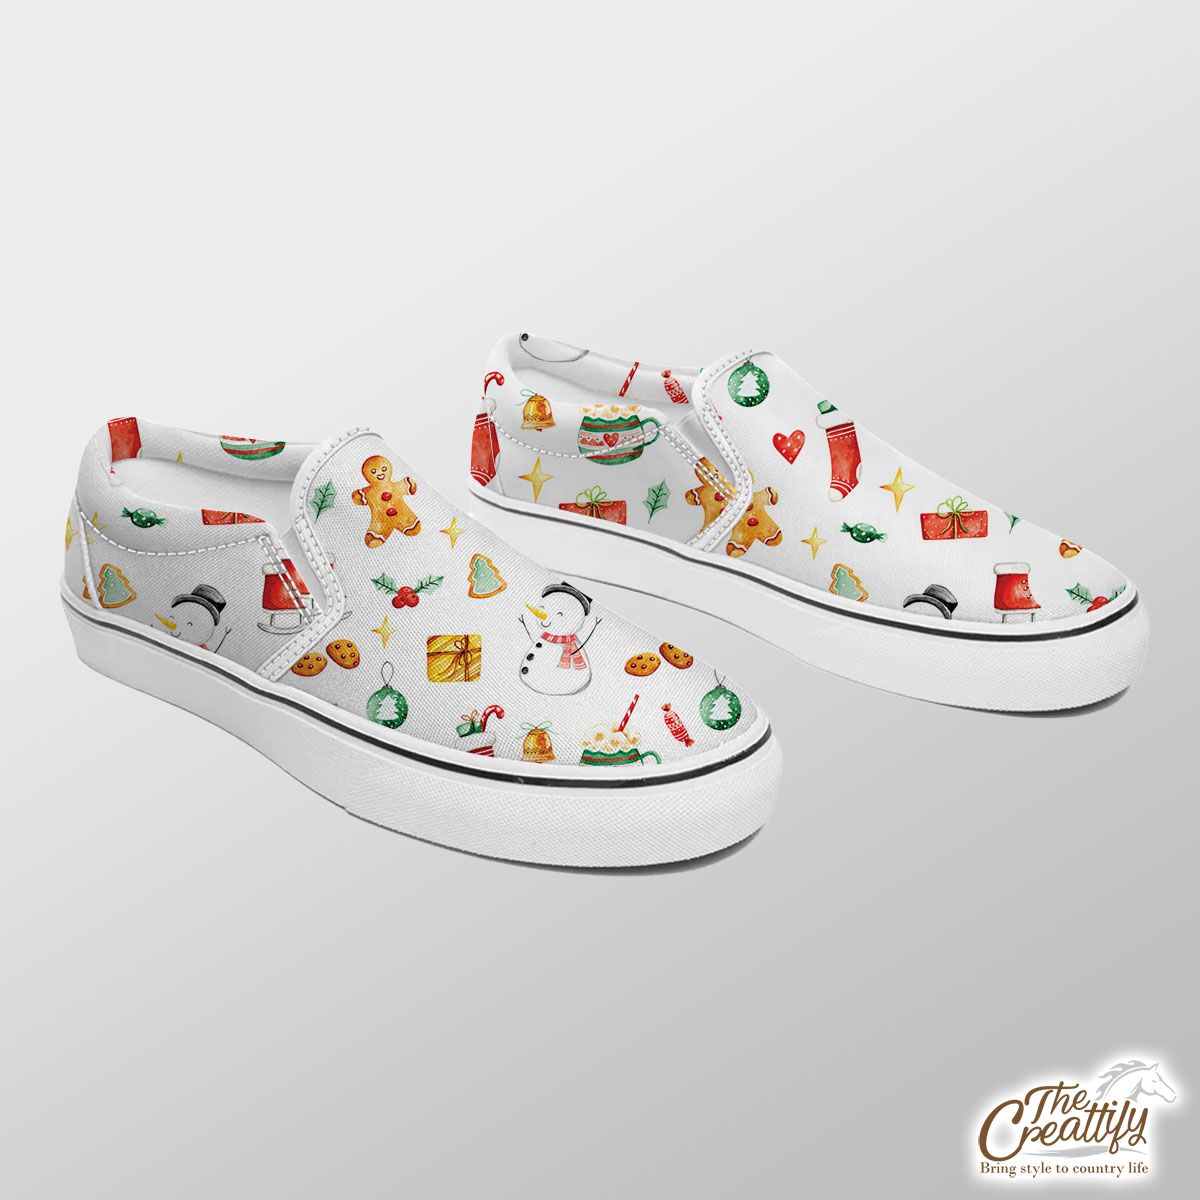 Snowman, Gingerbread And Christmas Gifts Slip On Sneakers